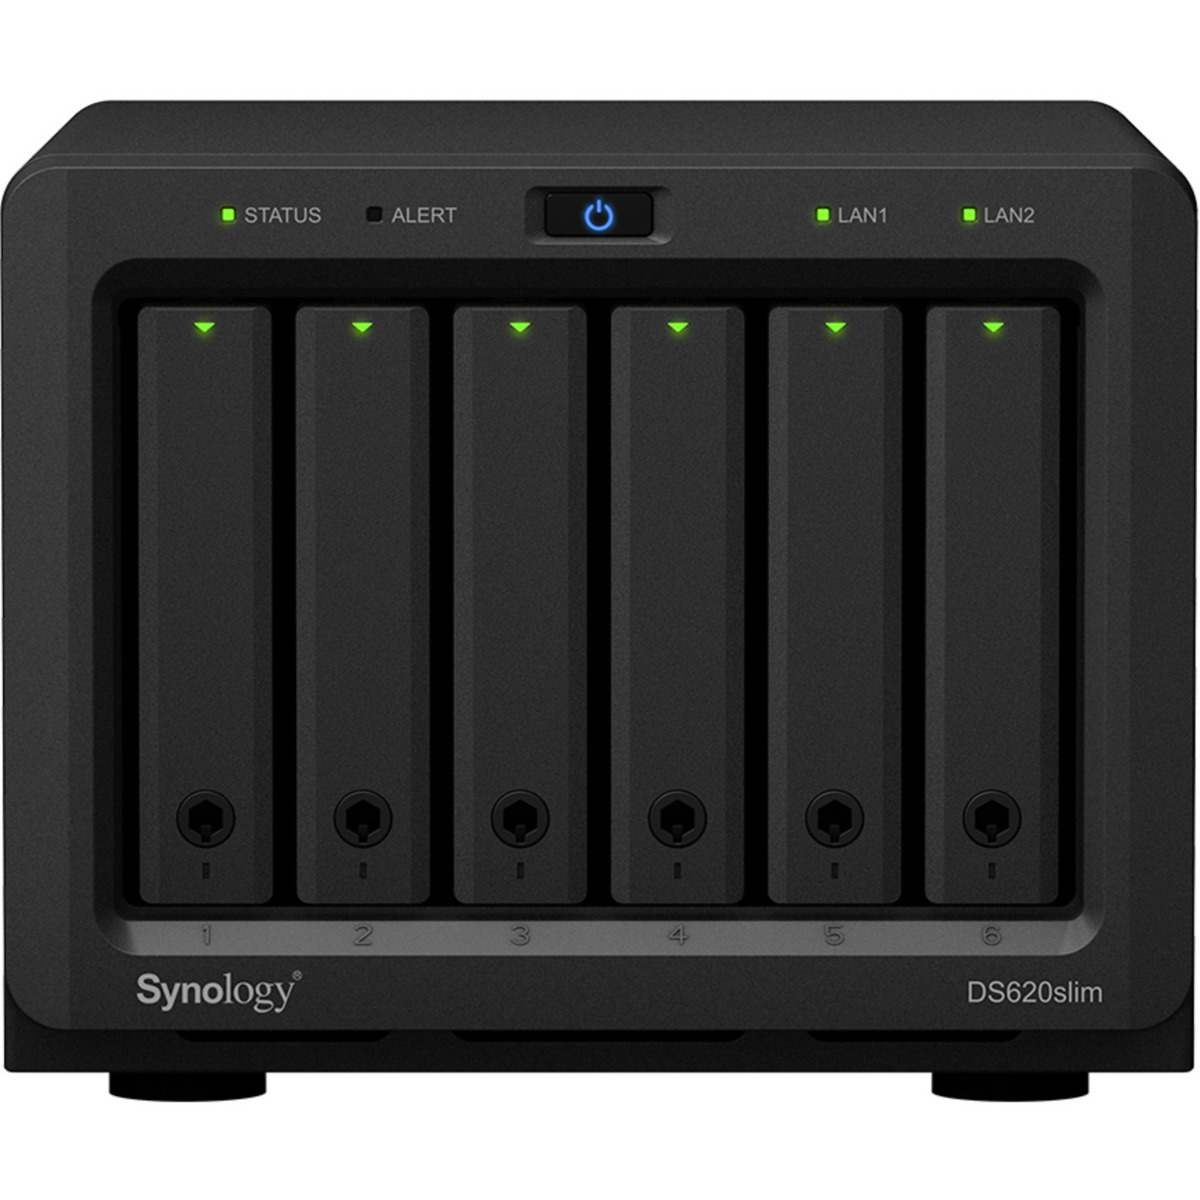 Synology DiskStation DS620slim 24tb 6-Bay Desktop Multimedia / Power User / Business NAS - Network Attached Storage Device 6x4tb Crucial MX500 CT4000MX500SSD1 2.5 560/510MB/s SATA 6Gb/s SSD CONSUMER Class Drives Installed - Burn-In Tested - FREE RAM UPGRADE DiskStation DS620slim